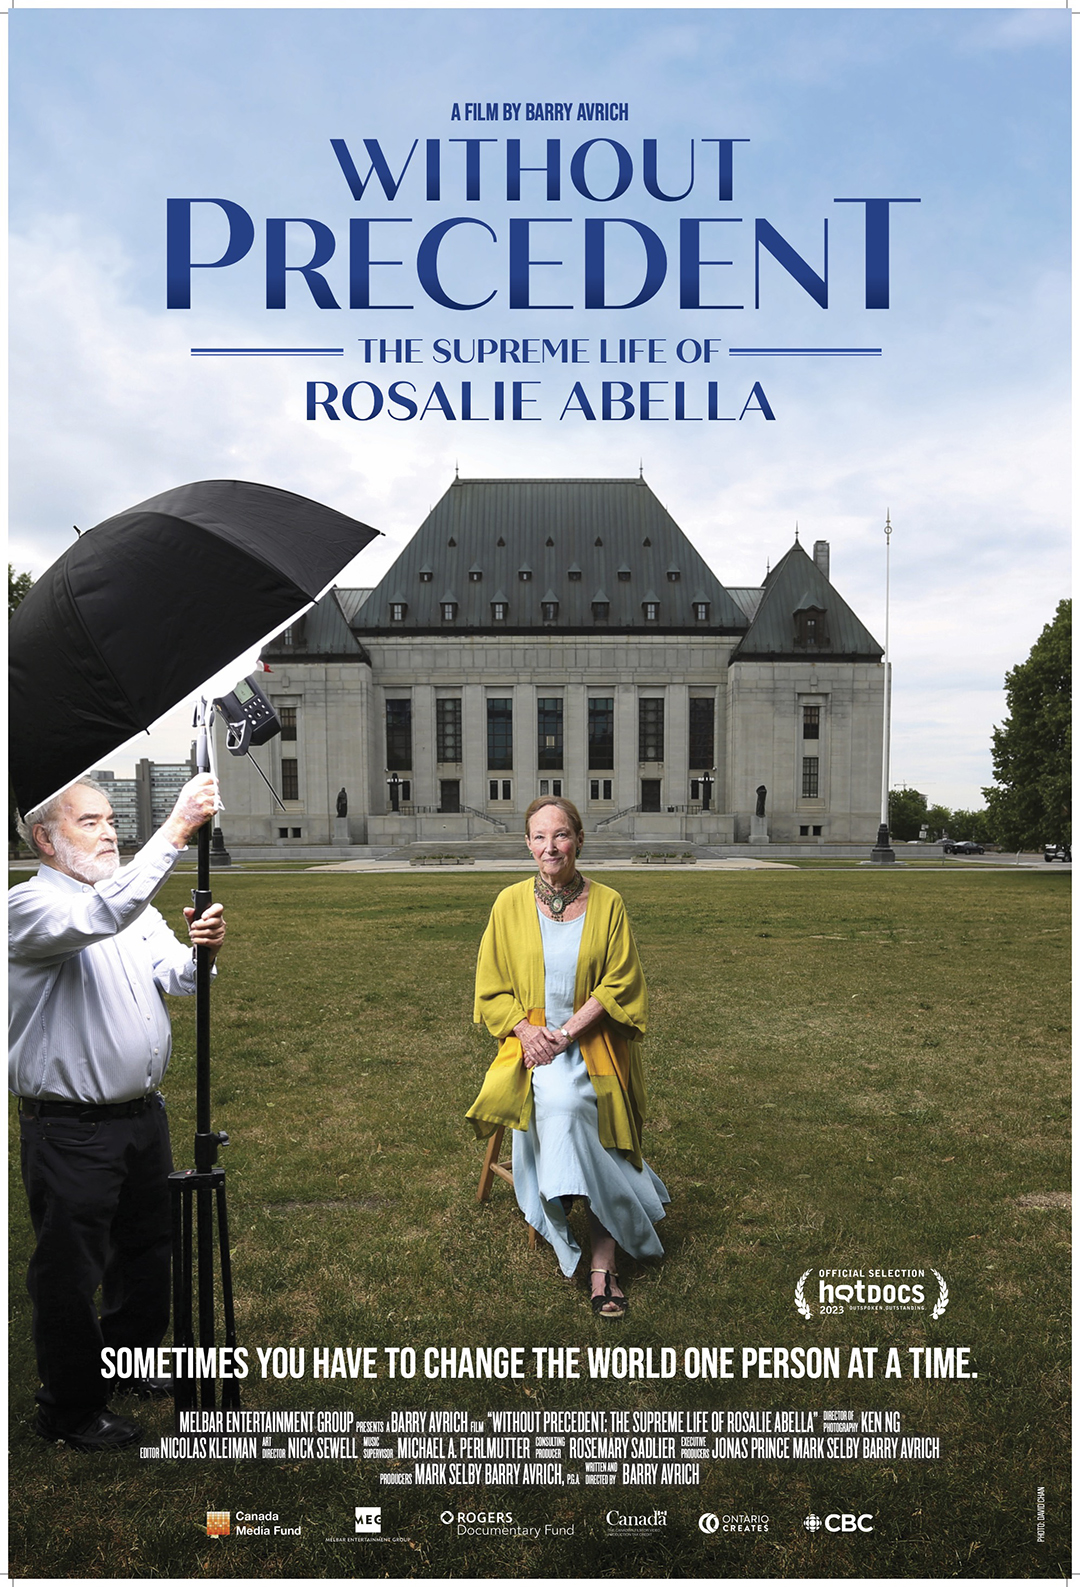 Without Precedent: The Supreme Life of Rosalie Abella (film poster)